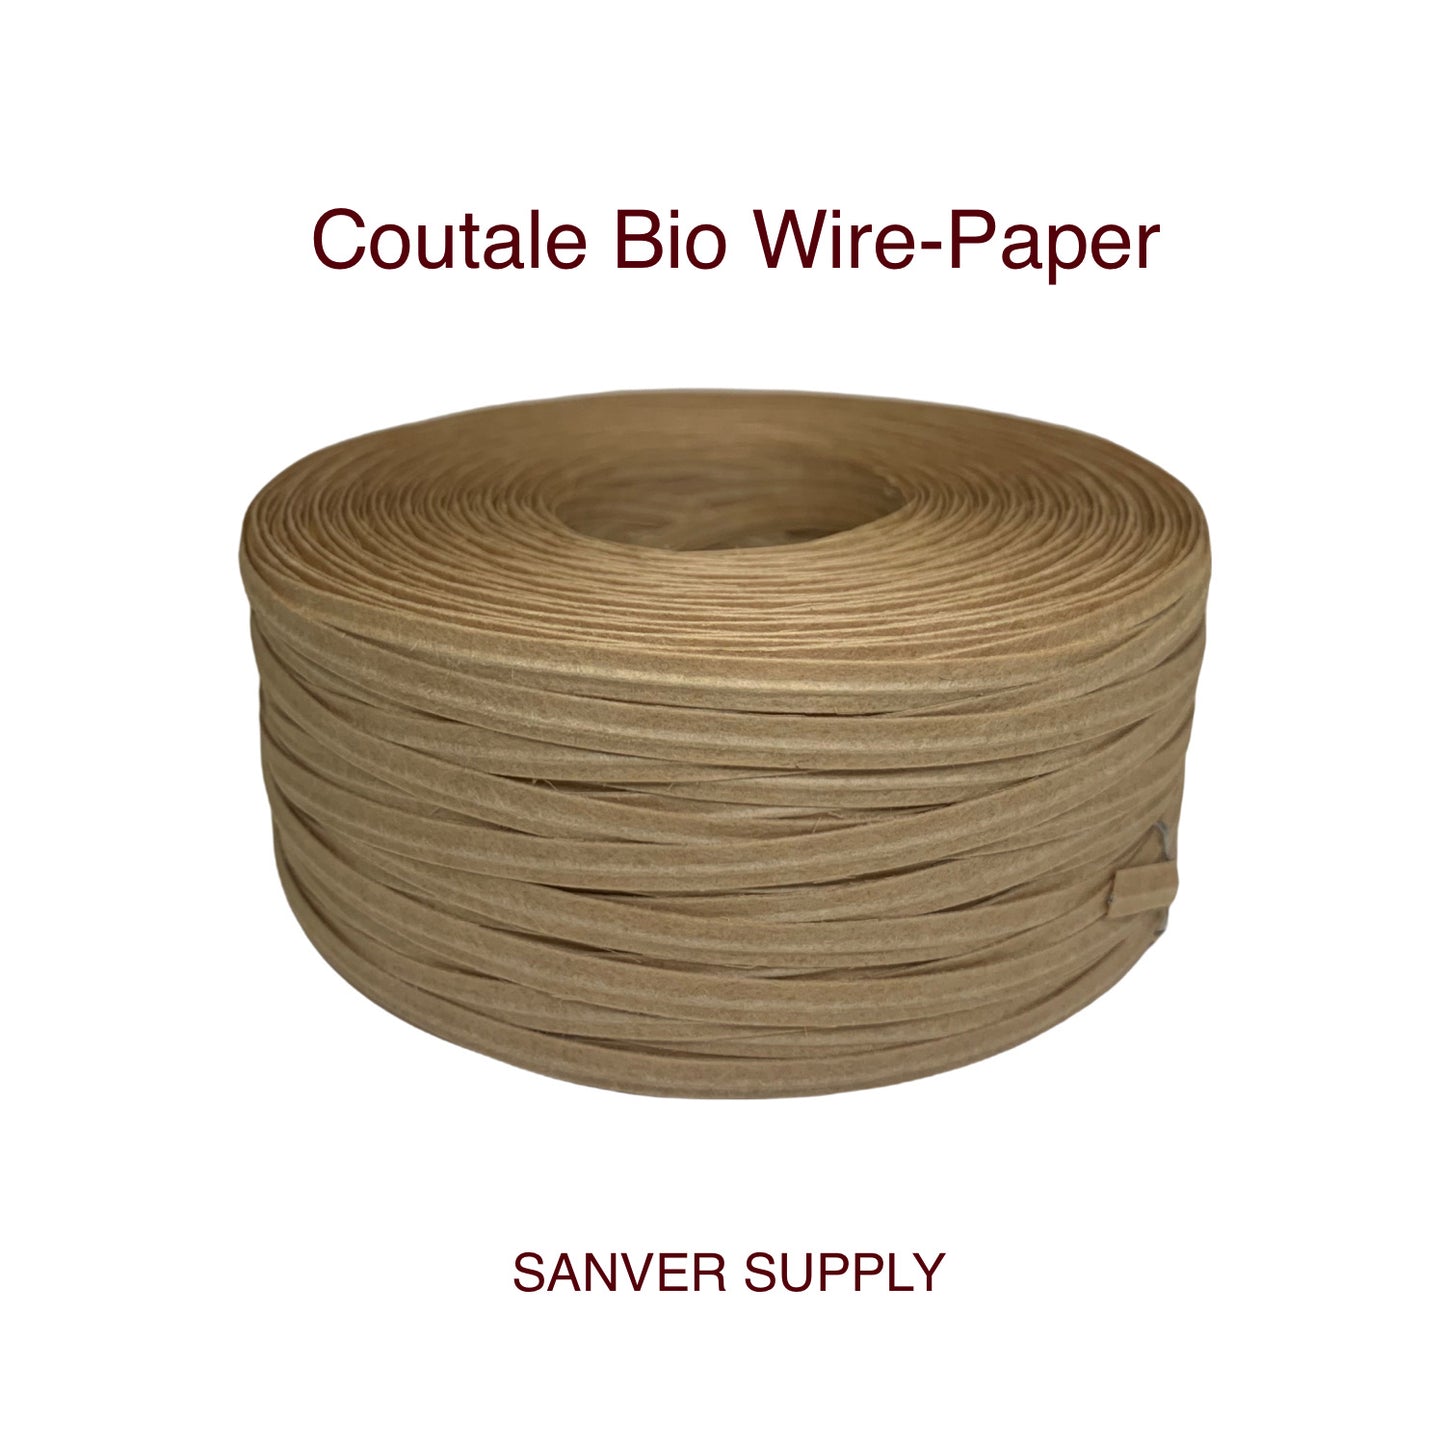 Coutale Biodegradable Tying Wire-Paper